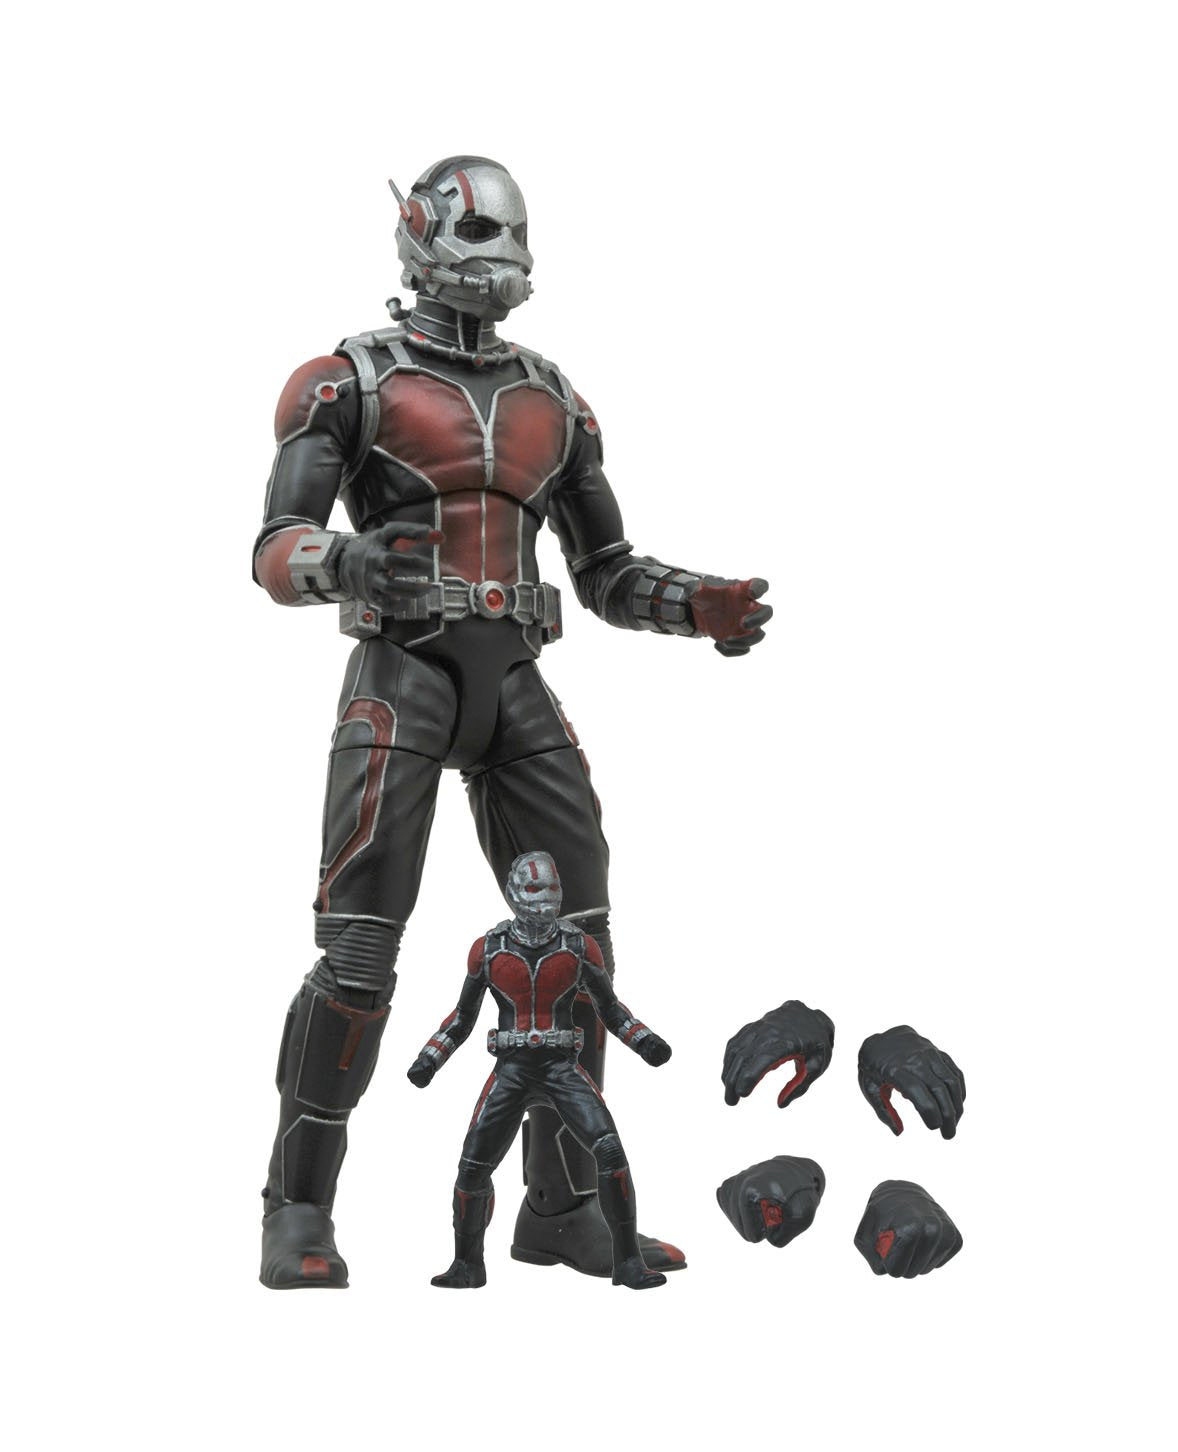 Marvel Movie collection : Ant man